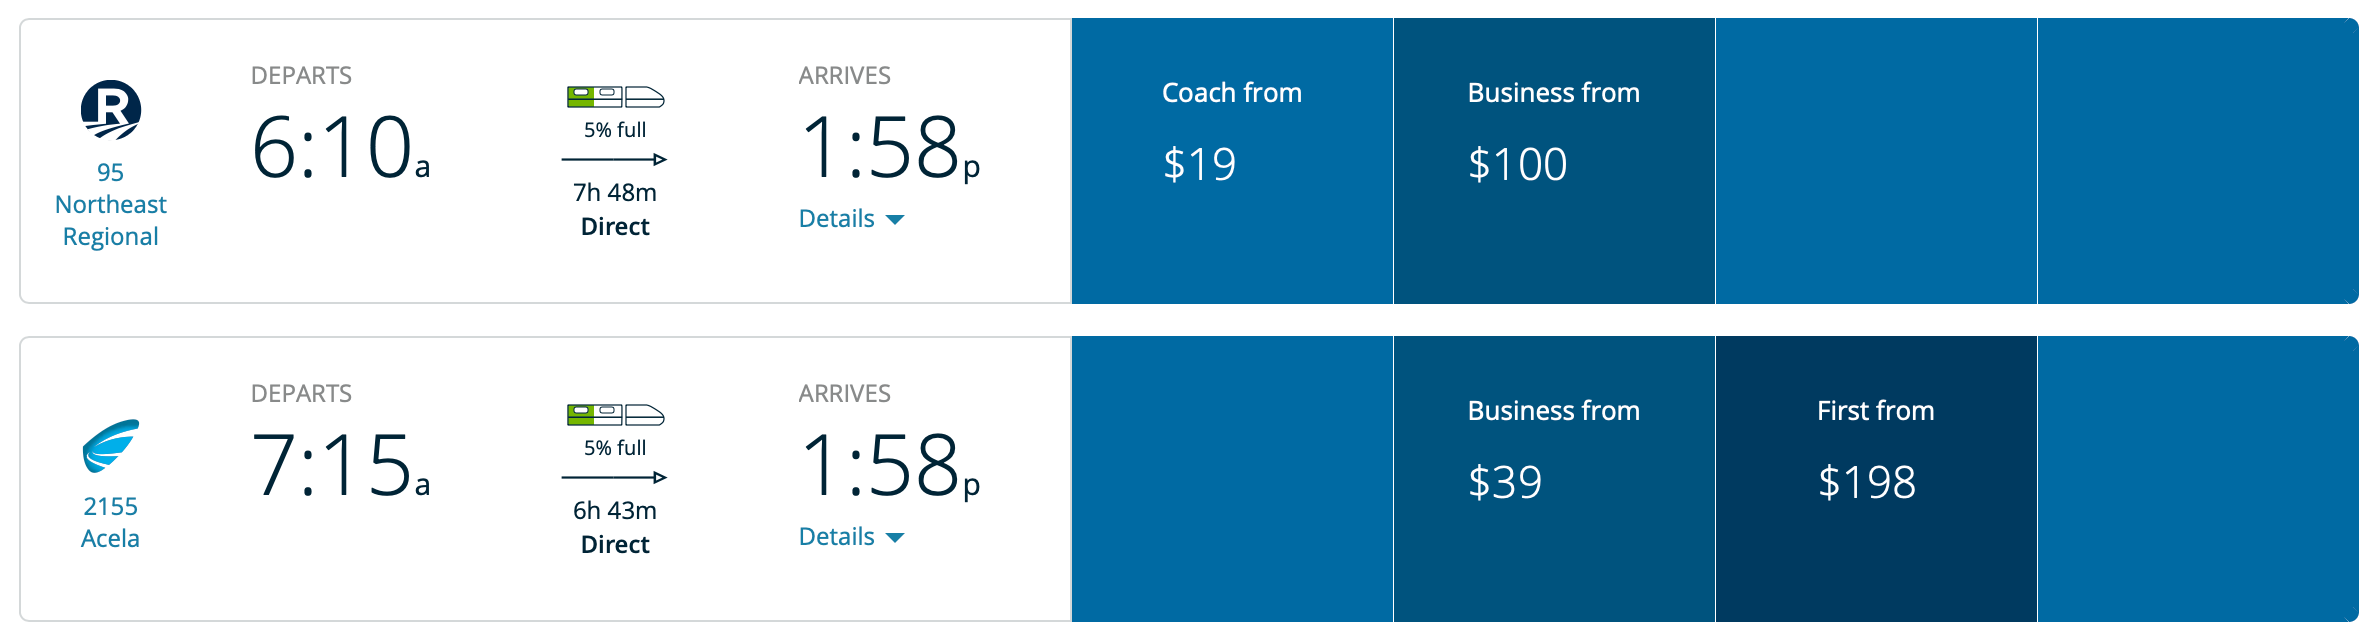 Amtrak offering $19 coach, $39 Acela business class tickets - The Points Guy